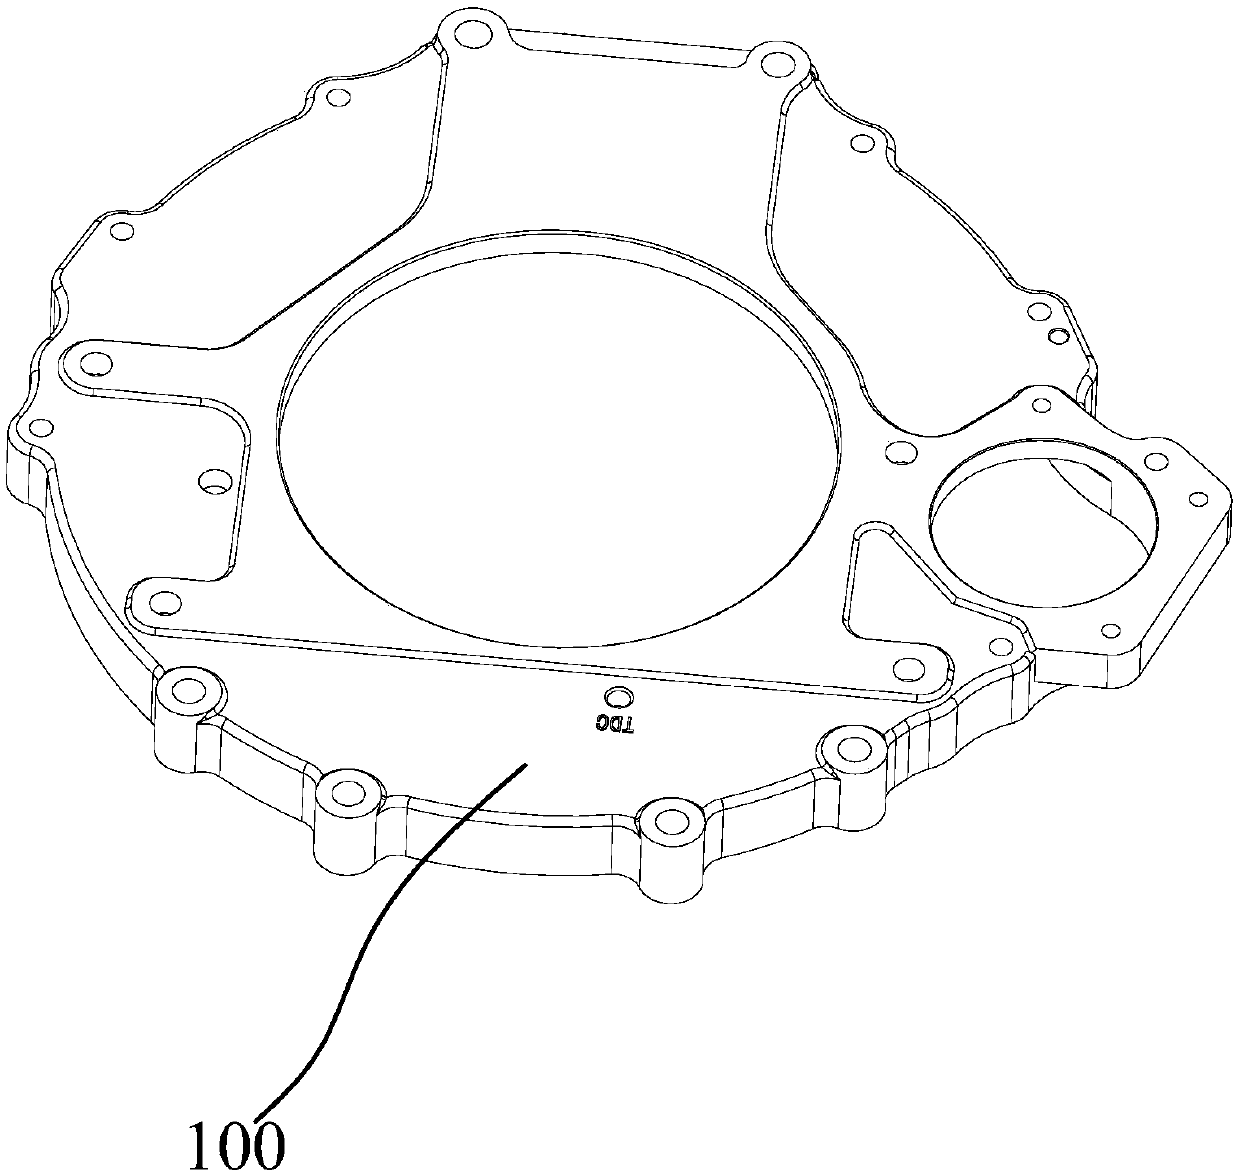 Engine transition connecting plate positioning tool